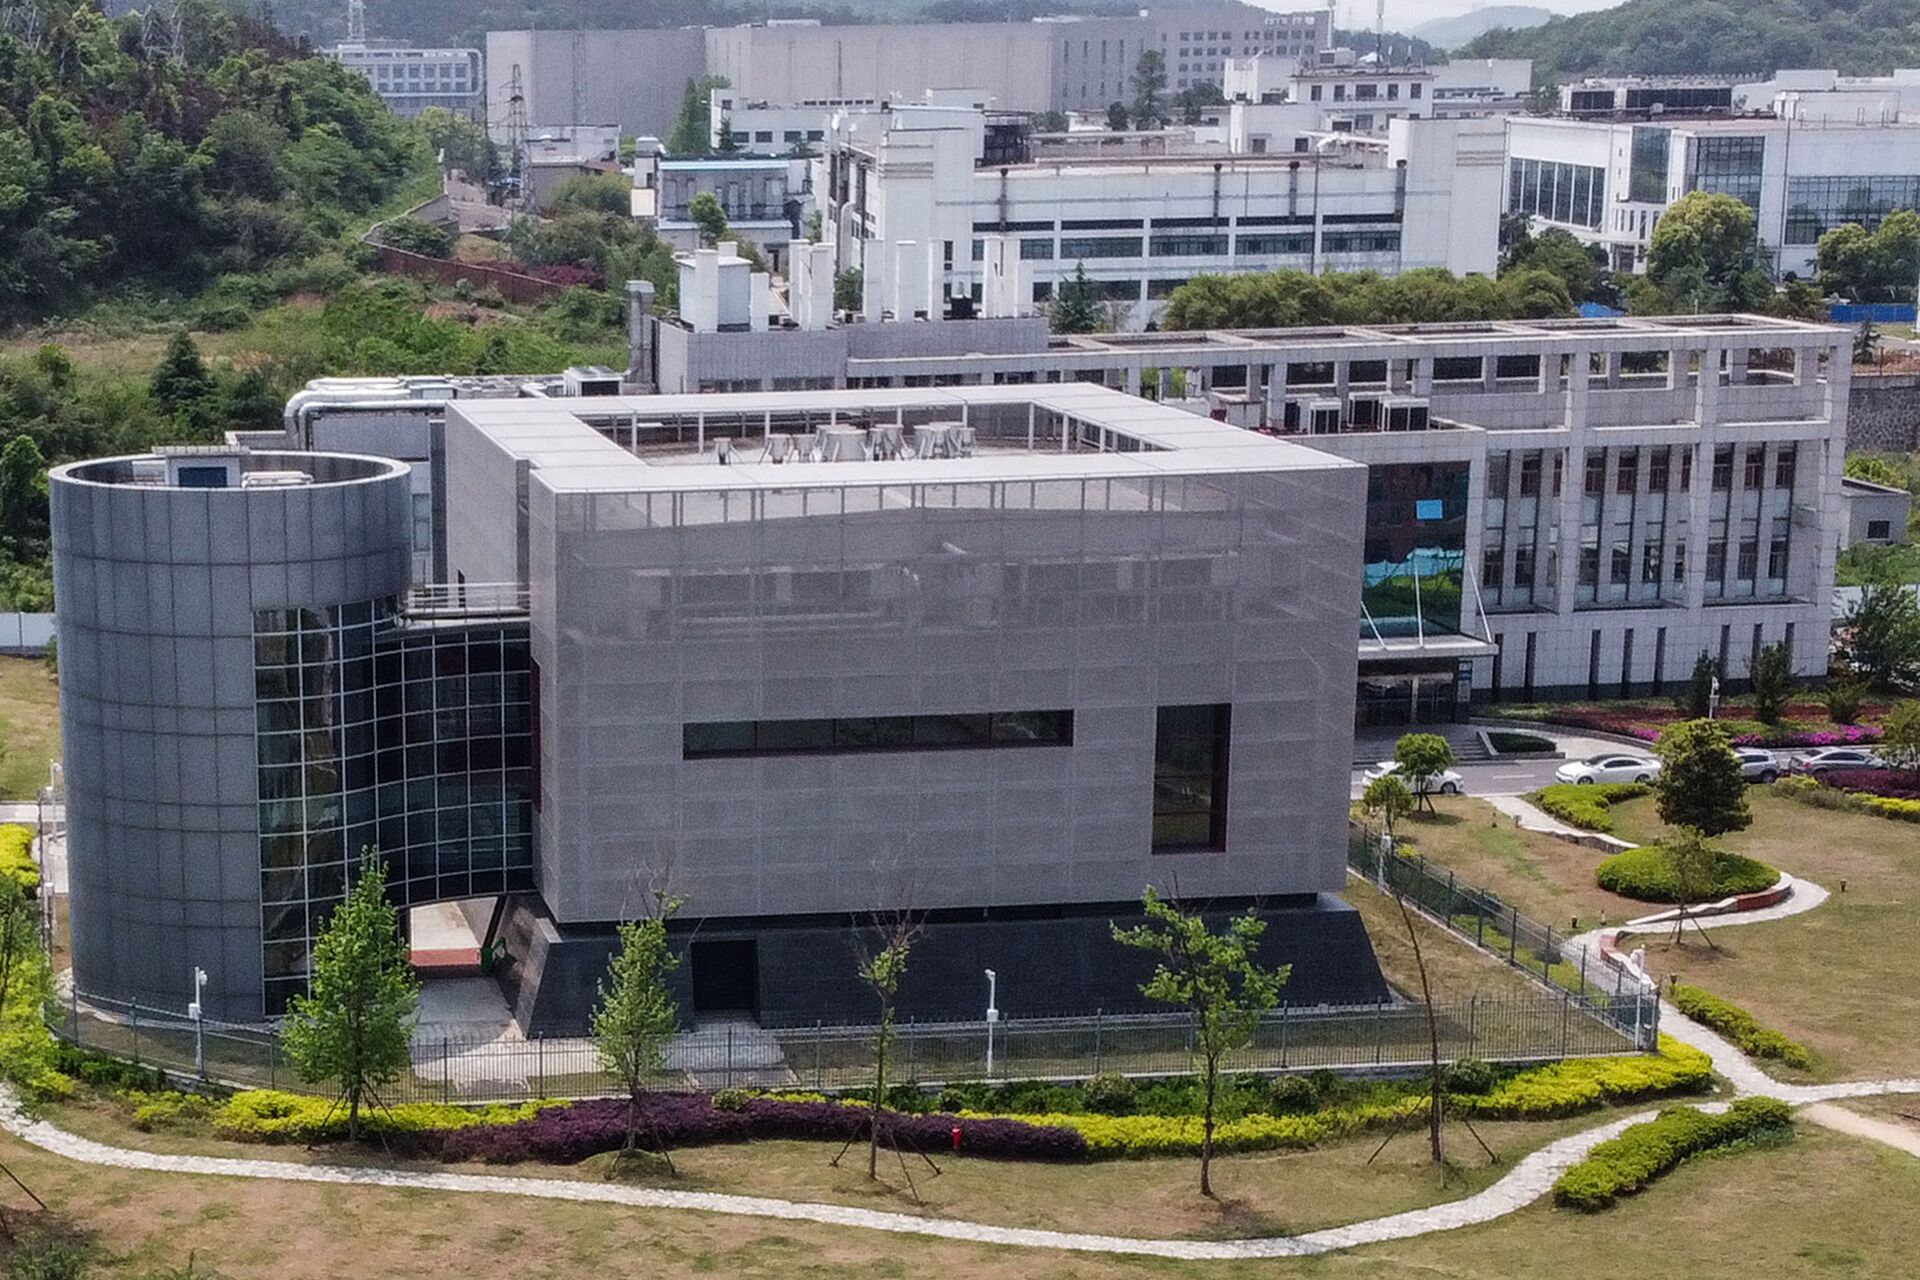 (FILES) This file photo taken on April 17, 2020 shows an aerial view of the P4 laboratory at the Wuhan Institute of Virology in Wuhan in China's central Hubei province - Sputnik International, 1920, 07.09.2021